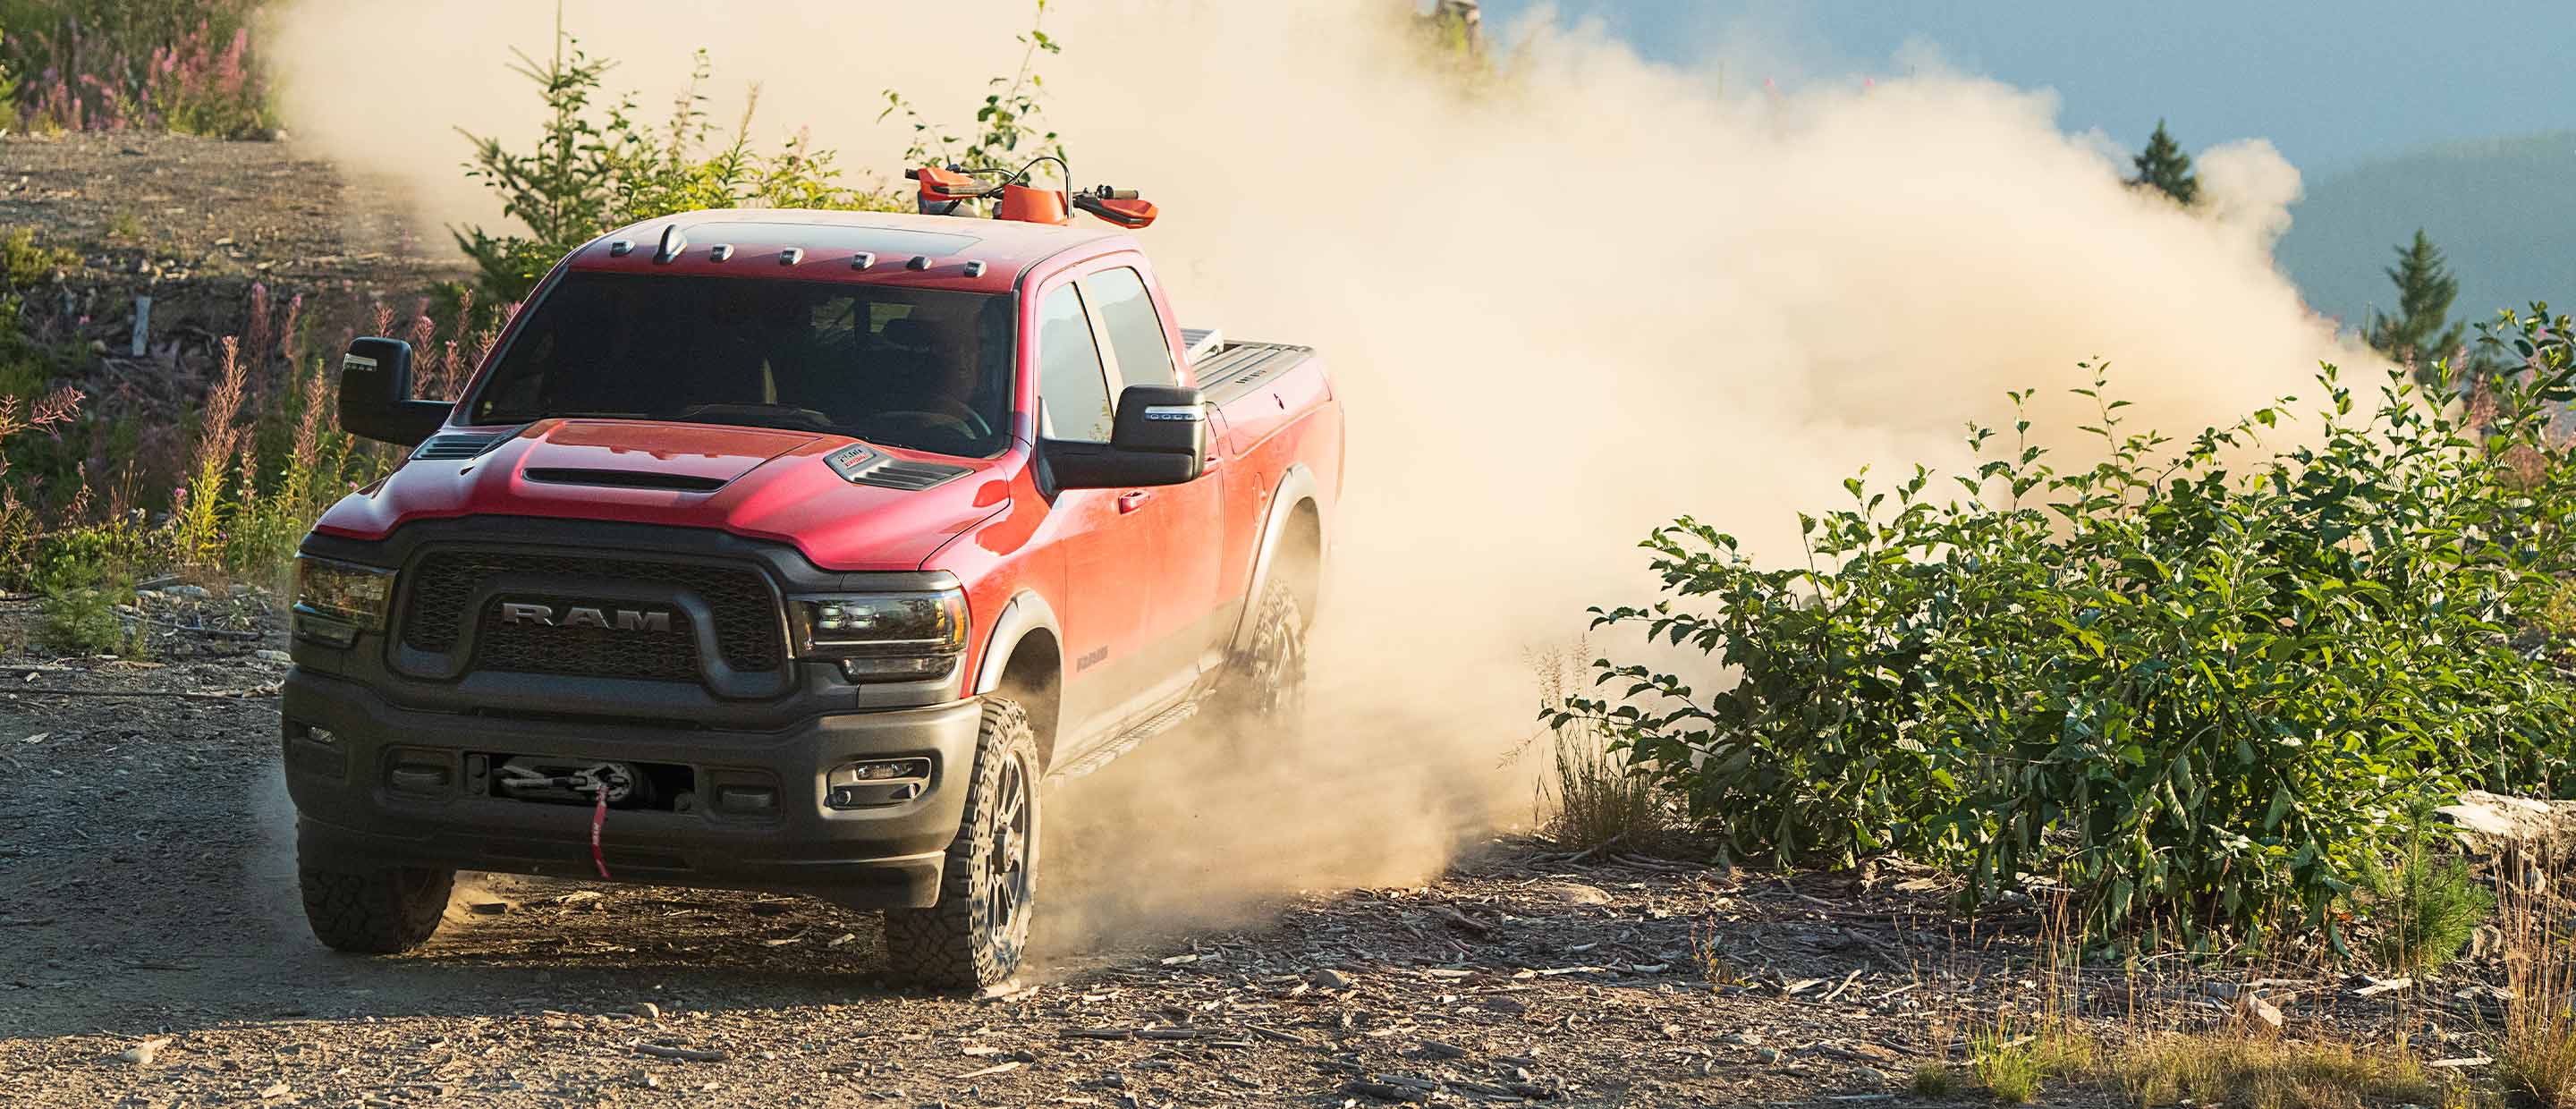 A red 2023 Ram 2500 Rebel being driven through a scrubby trail, kicking up a large plume of dust in its wake.